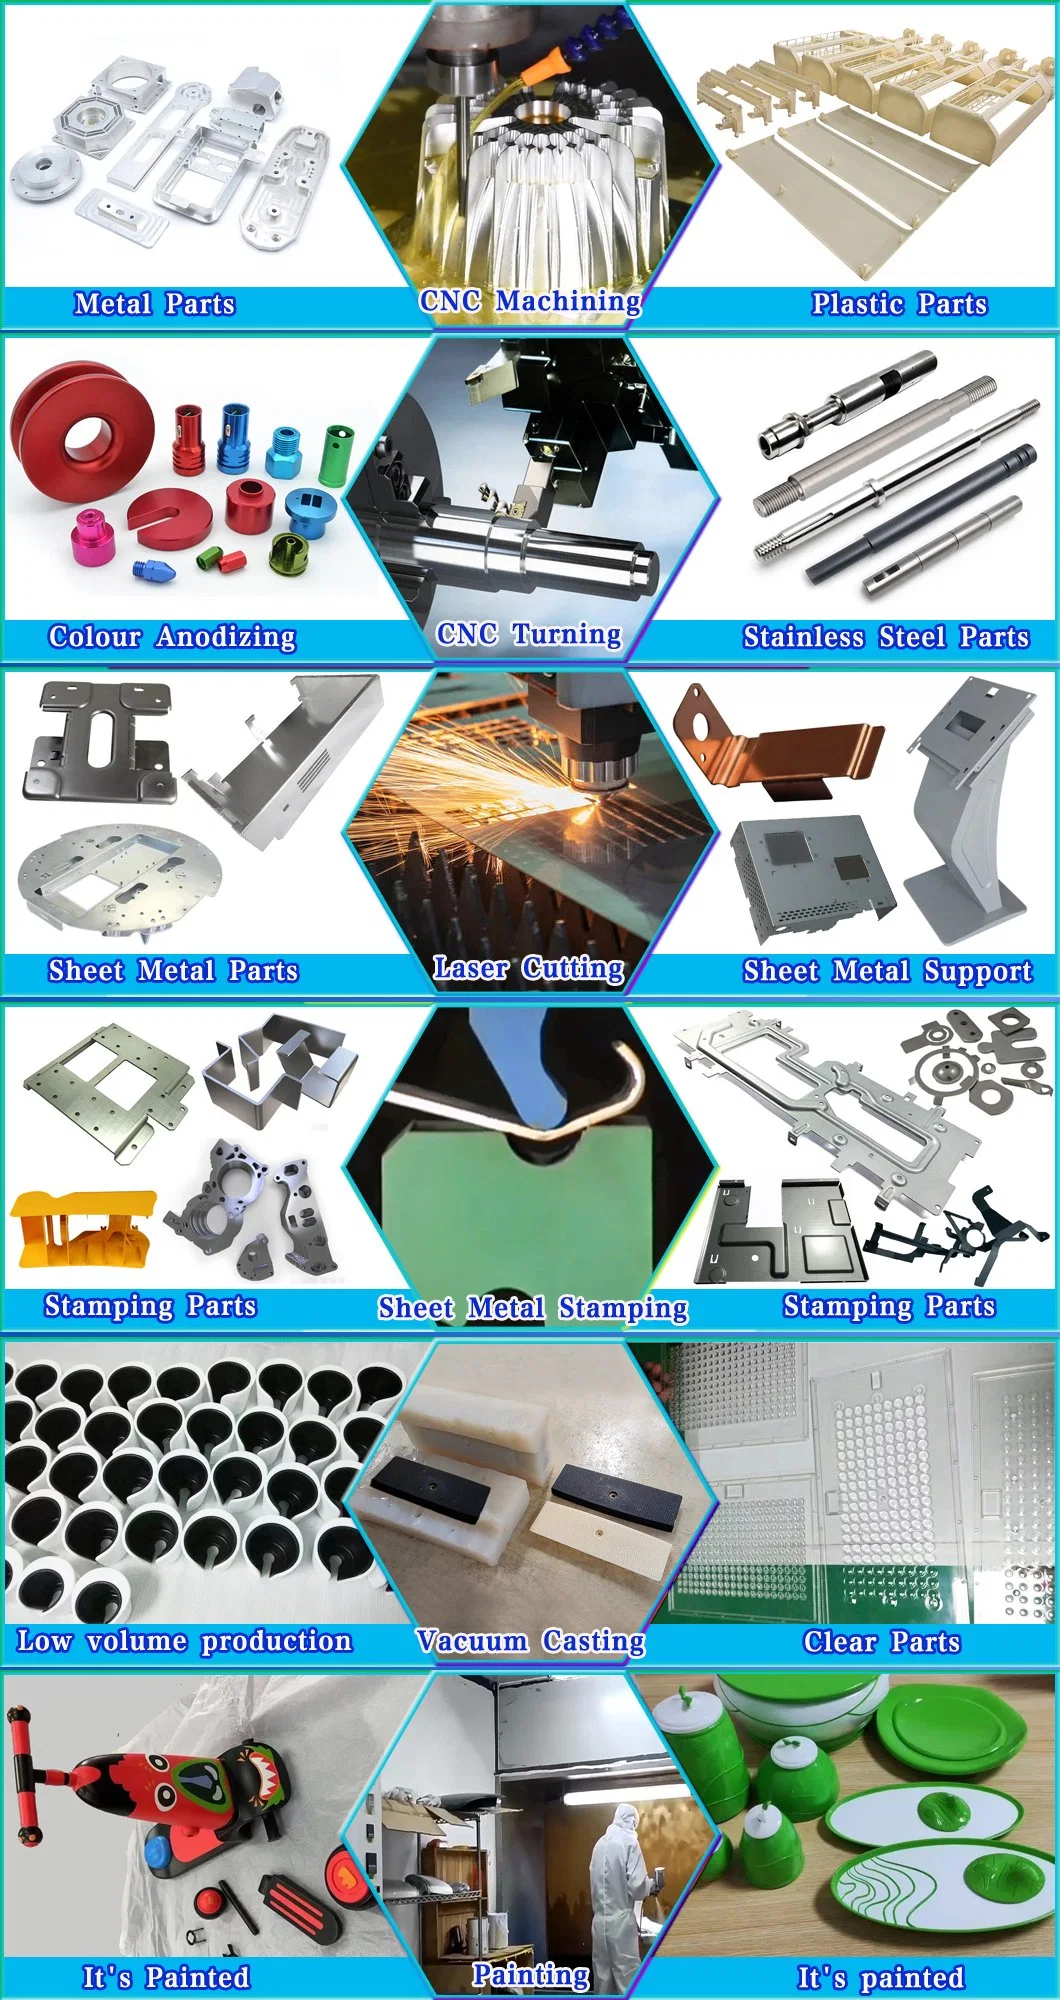 Silicone Molding Rubber Molding High Precision 3D Printing Service Sheet Metal Fabrication